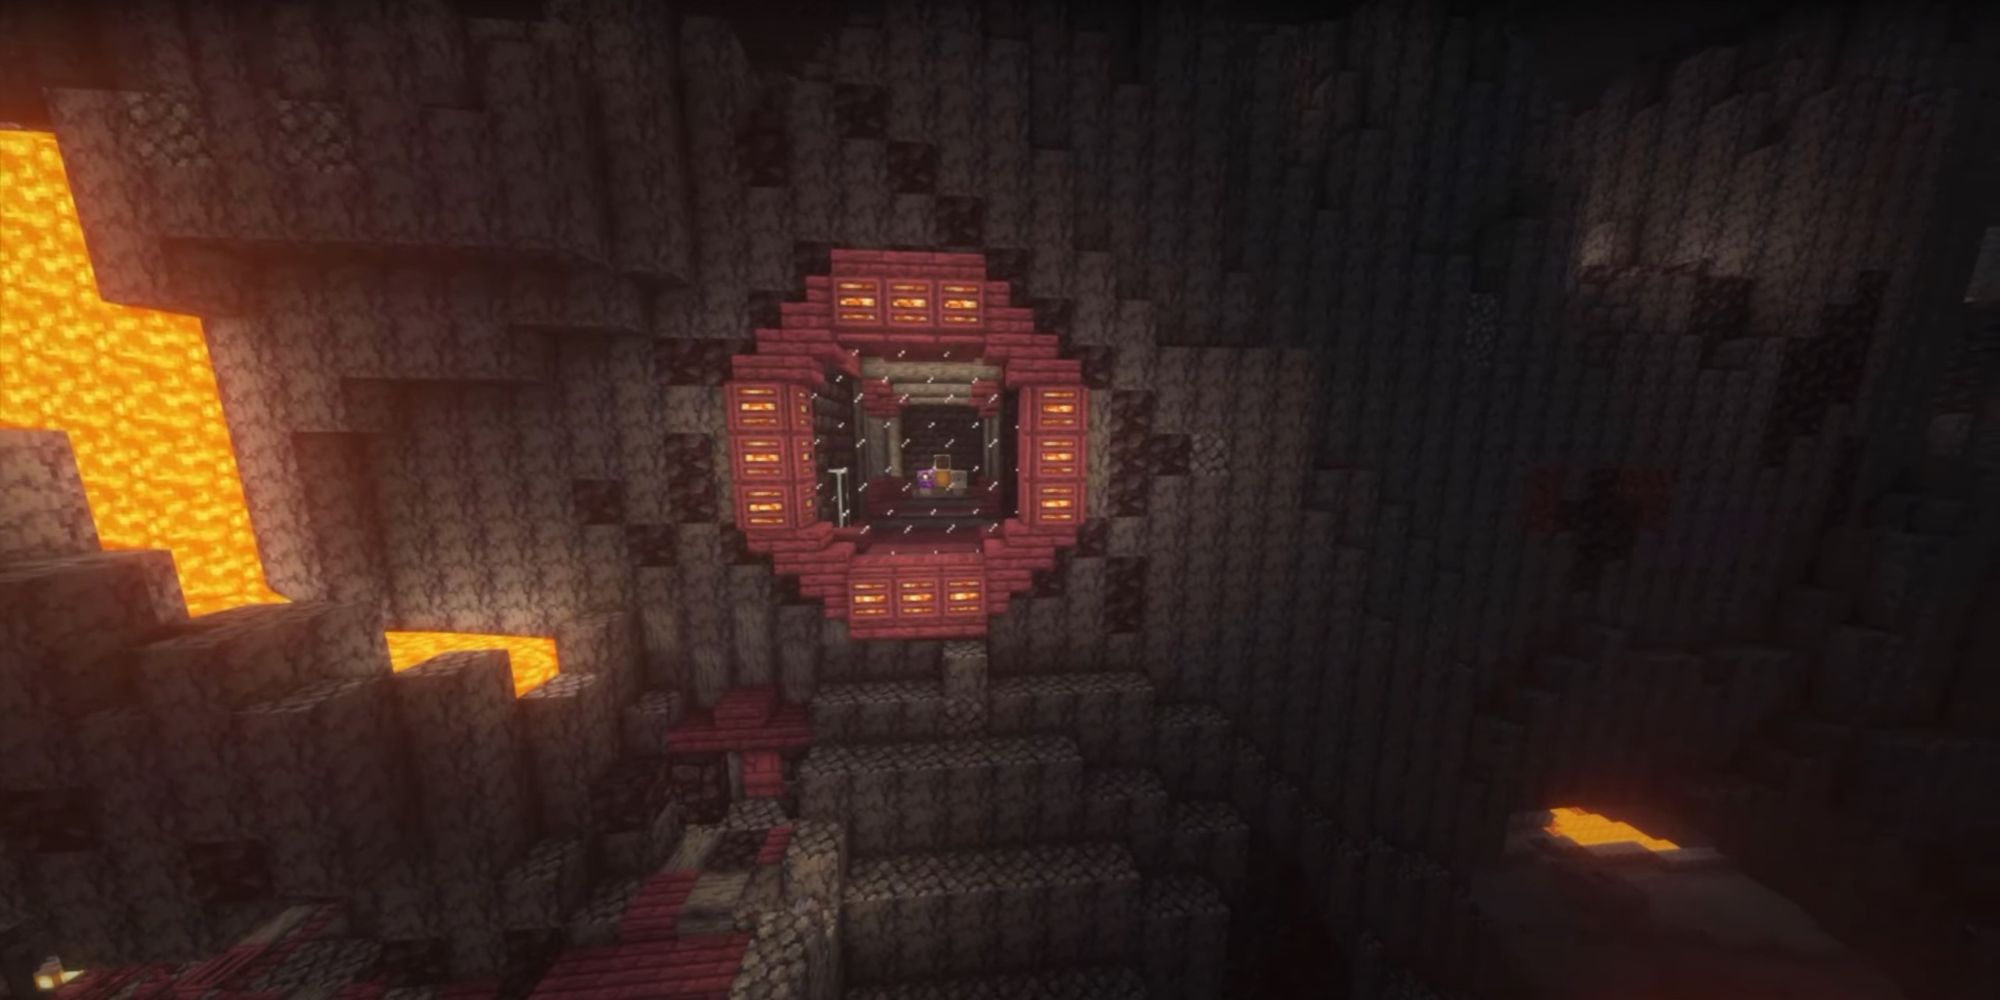 An image from Minecraft of a nether base that is carved into the side of a basalt mountain, thus creating a safe interior area away from dangerous lava and mobs.